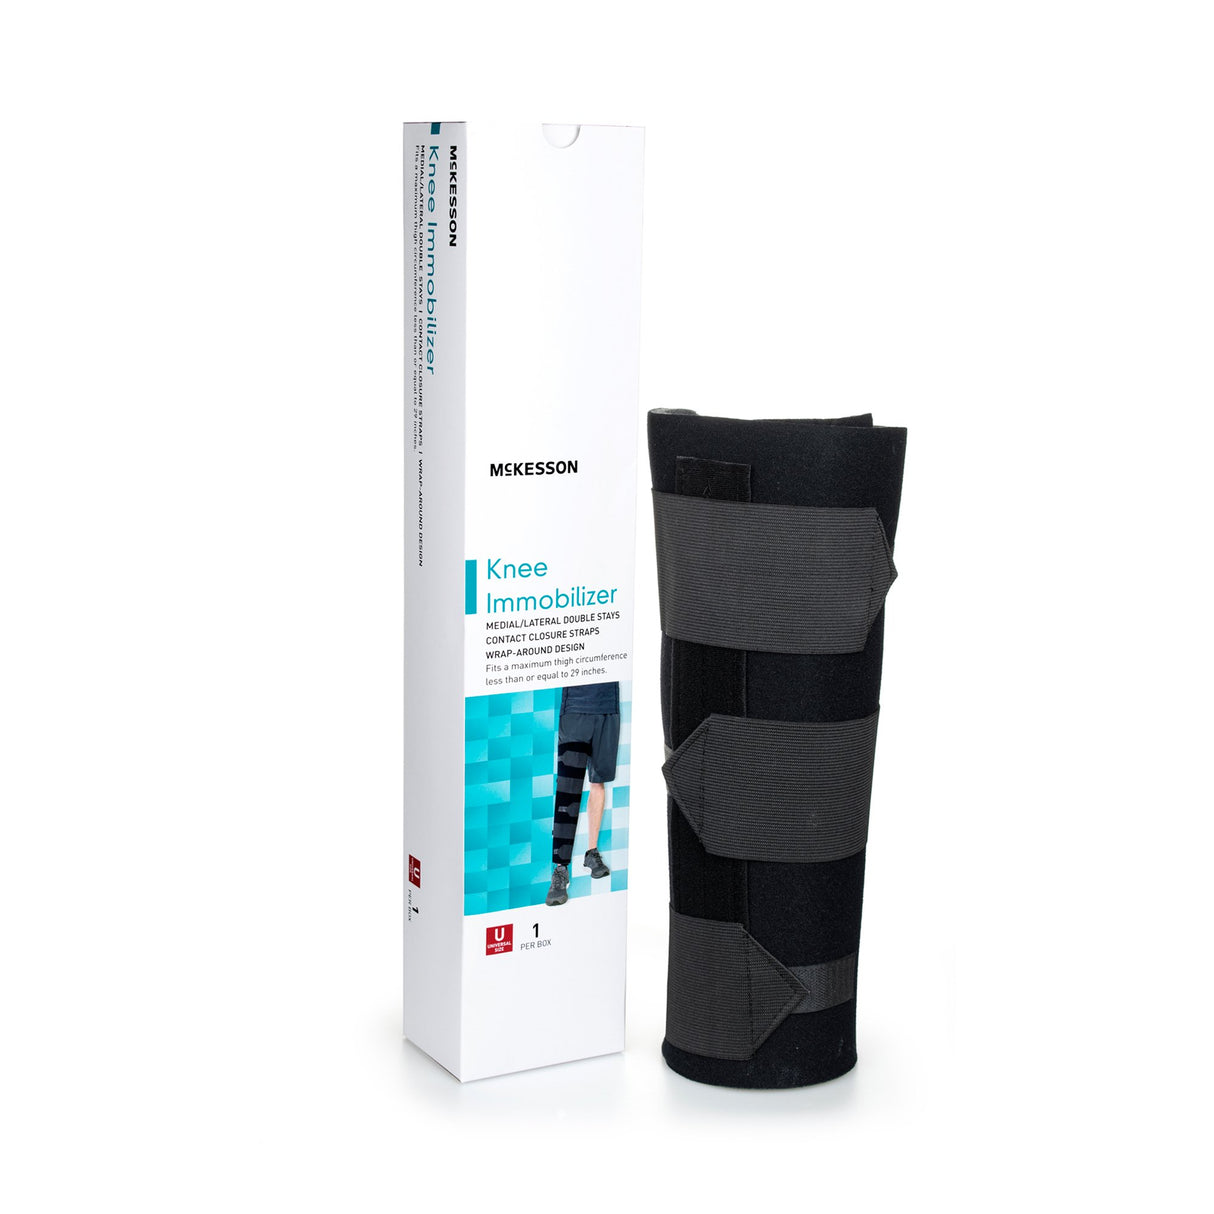 McKesson Knee Immobilizer, 12-Inch Length, One Size Fits Most